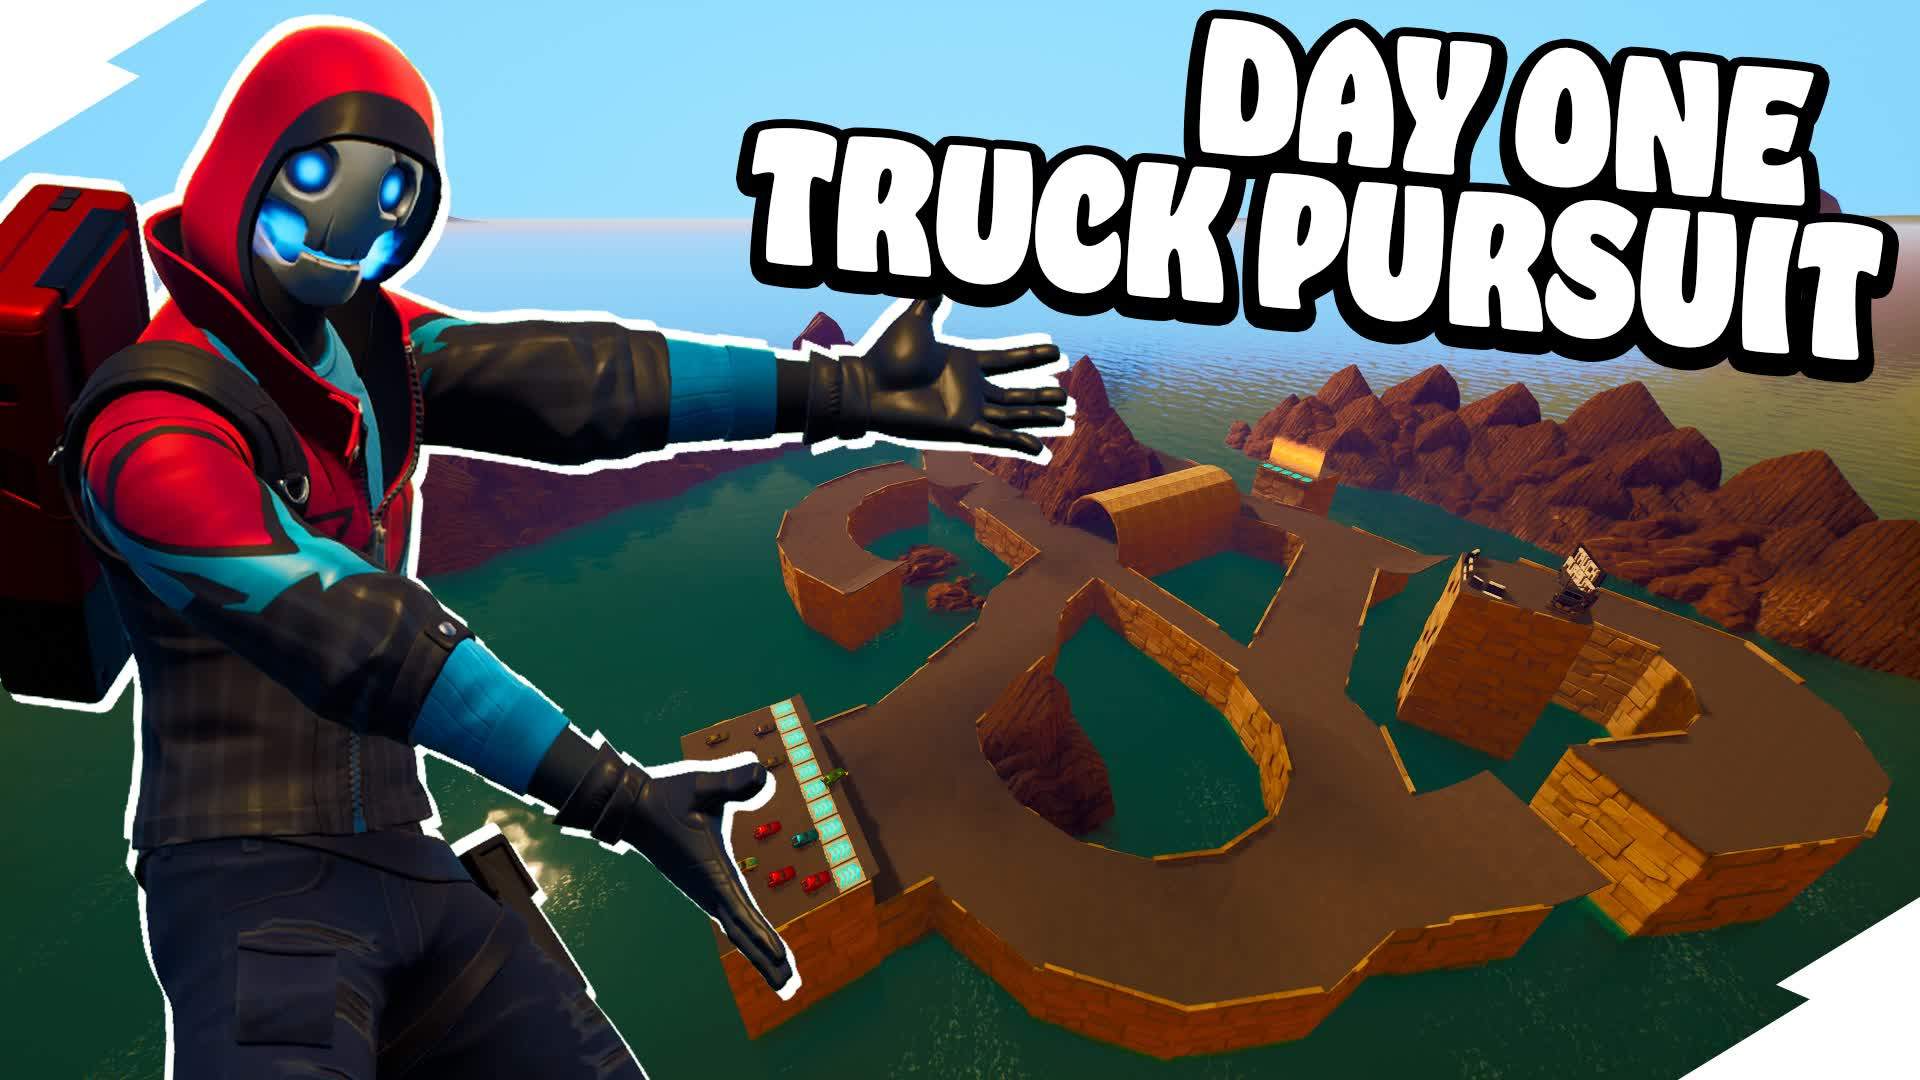 🏃‍♂️TRUCK PURSUIT!🚚 (DAY ONE VERSION)